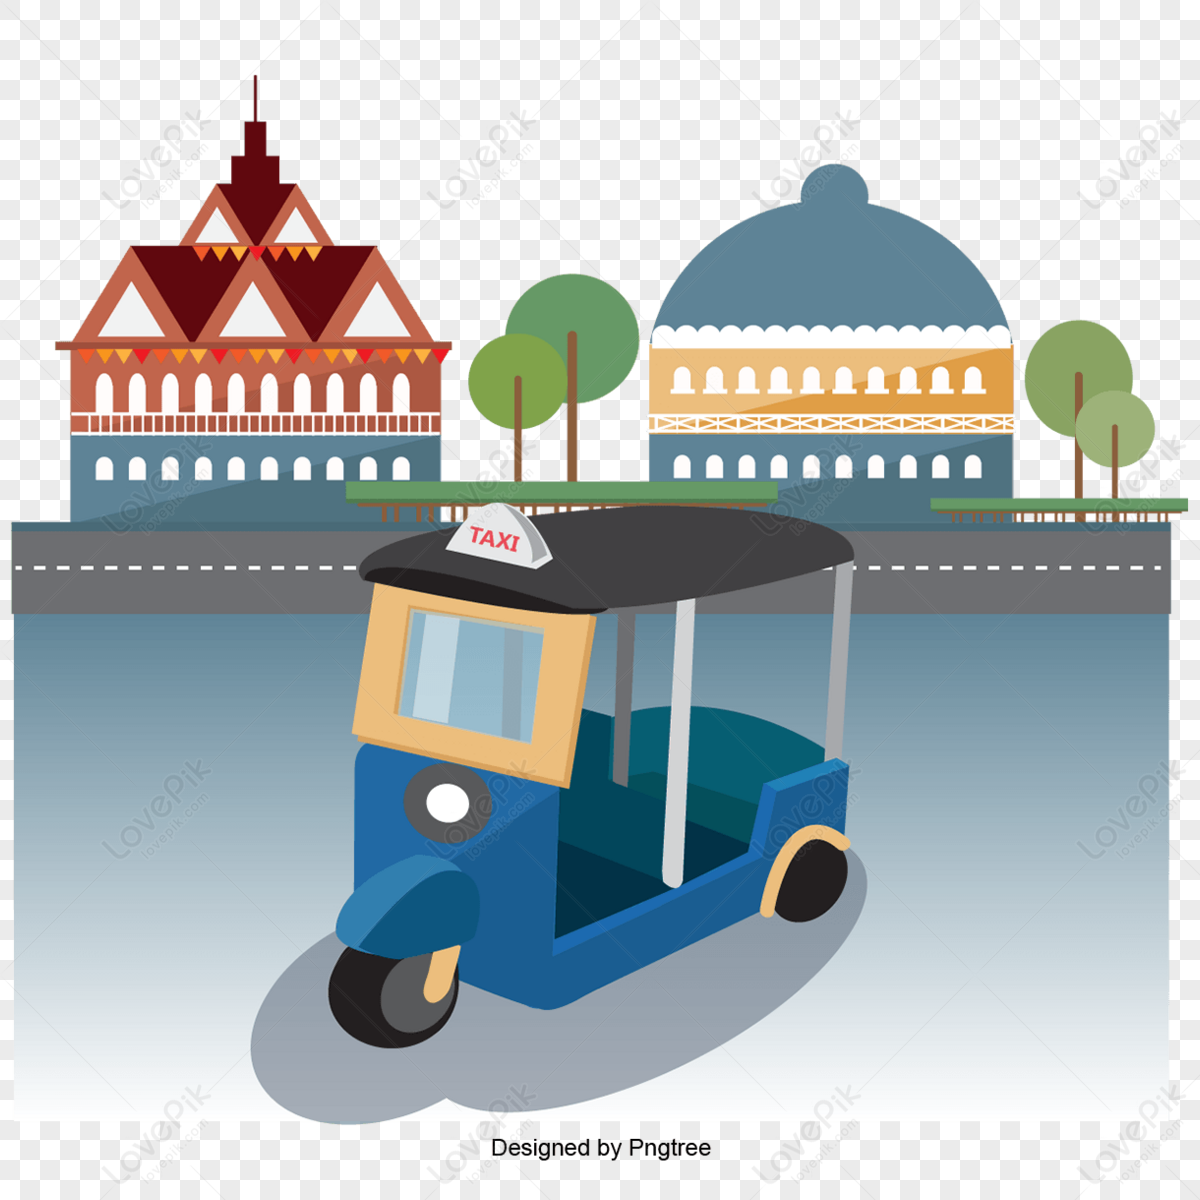 Taxi Thai yellow blue building home travel in the capital,building the house,yellow and blue png image free download